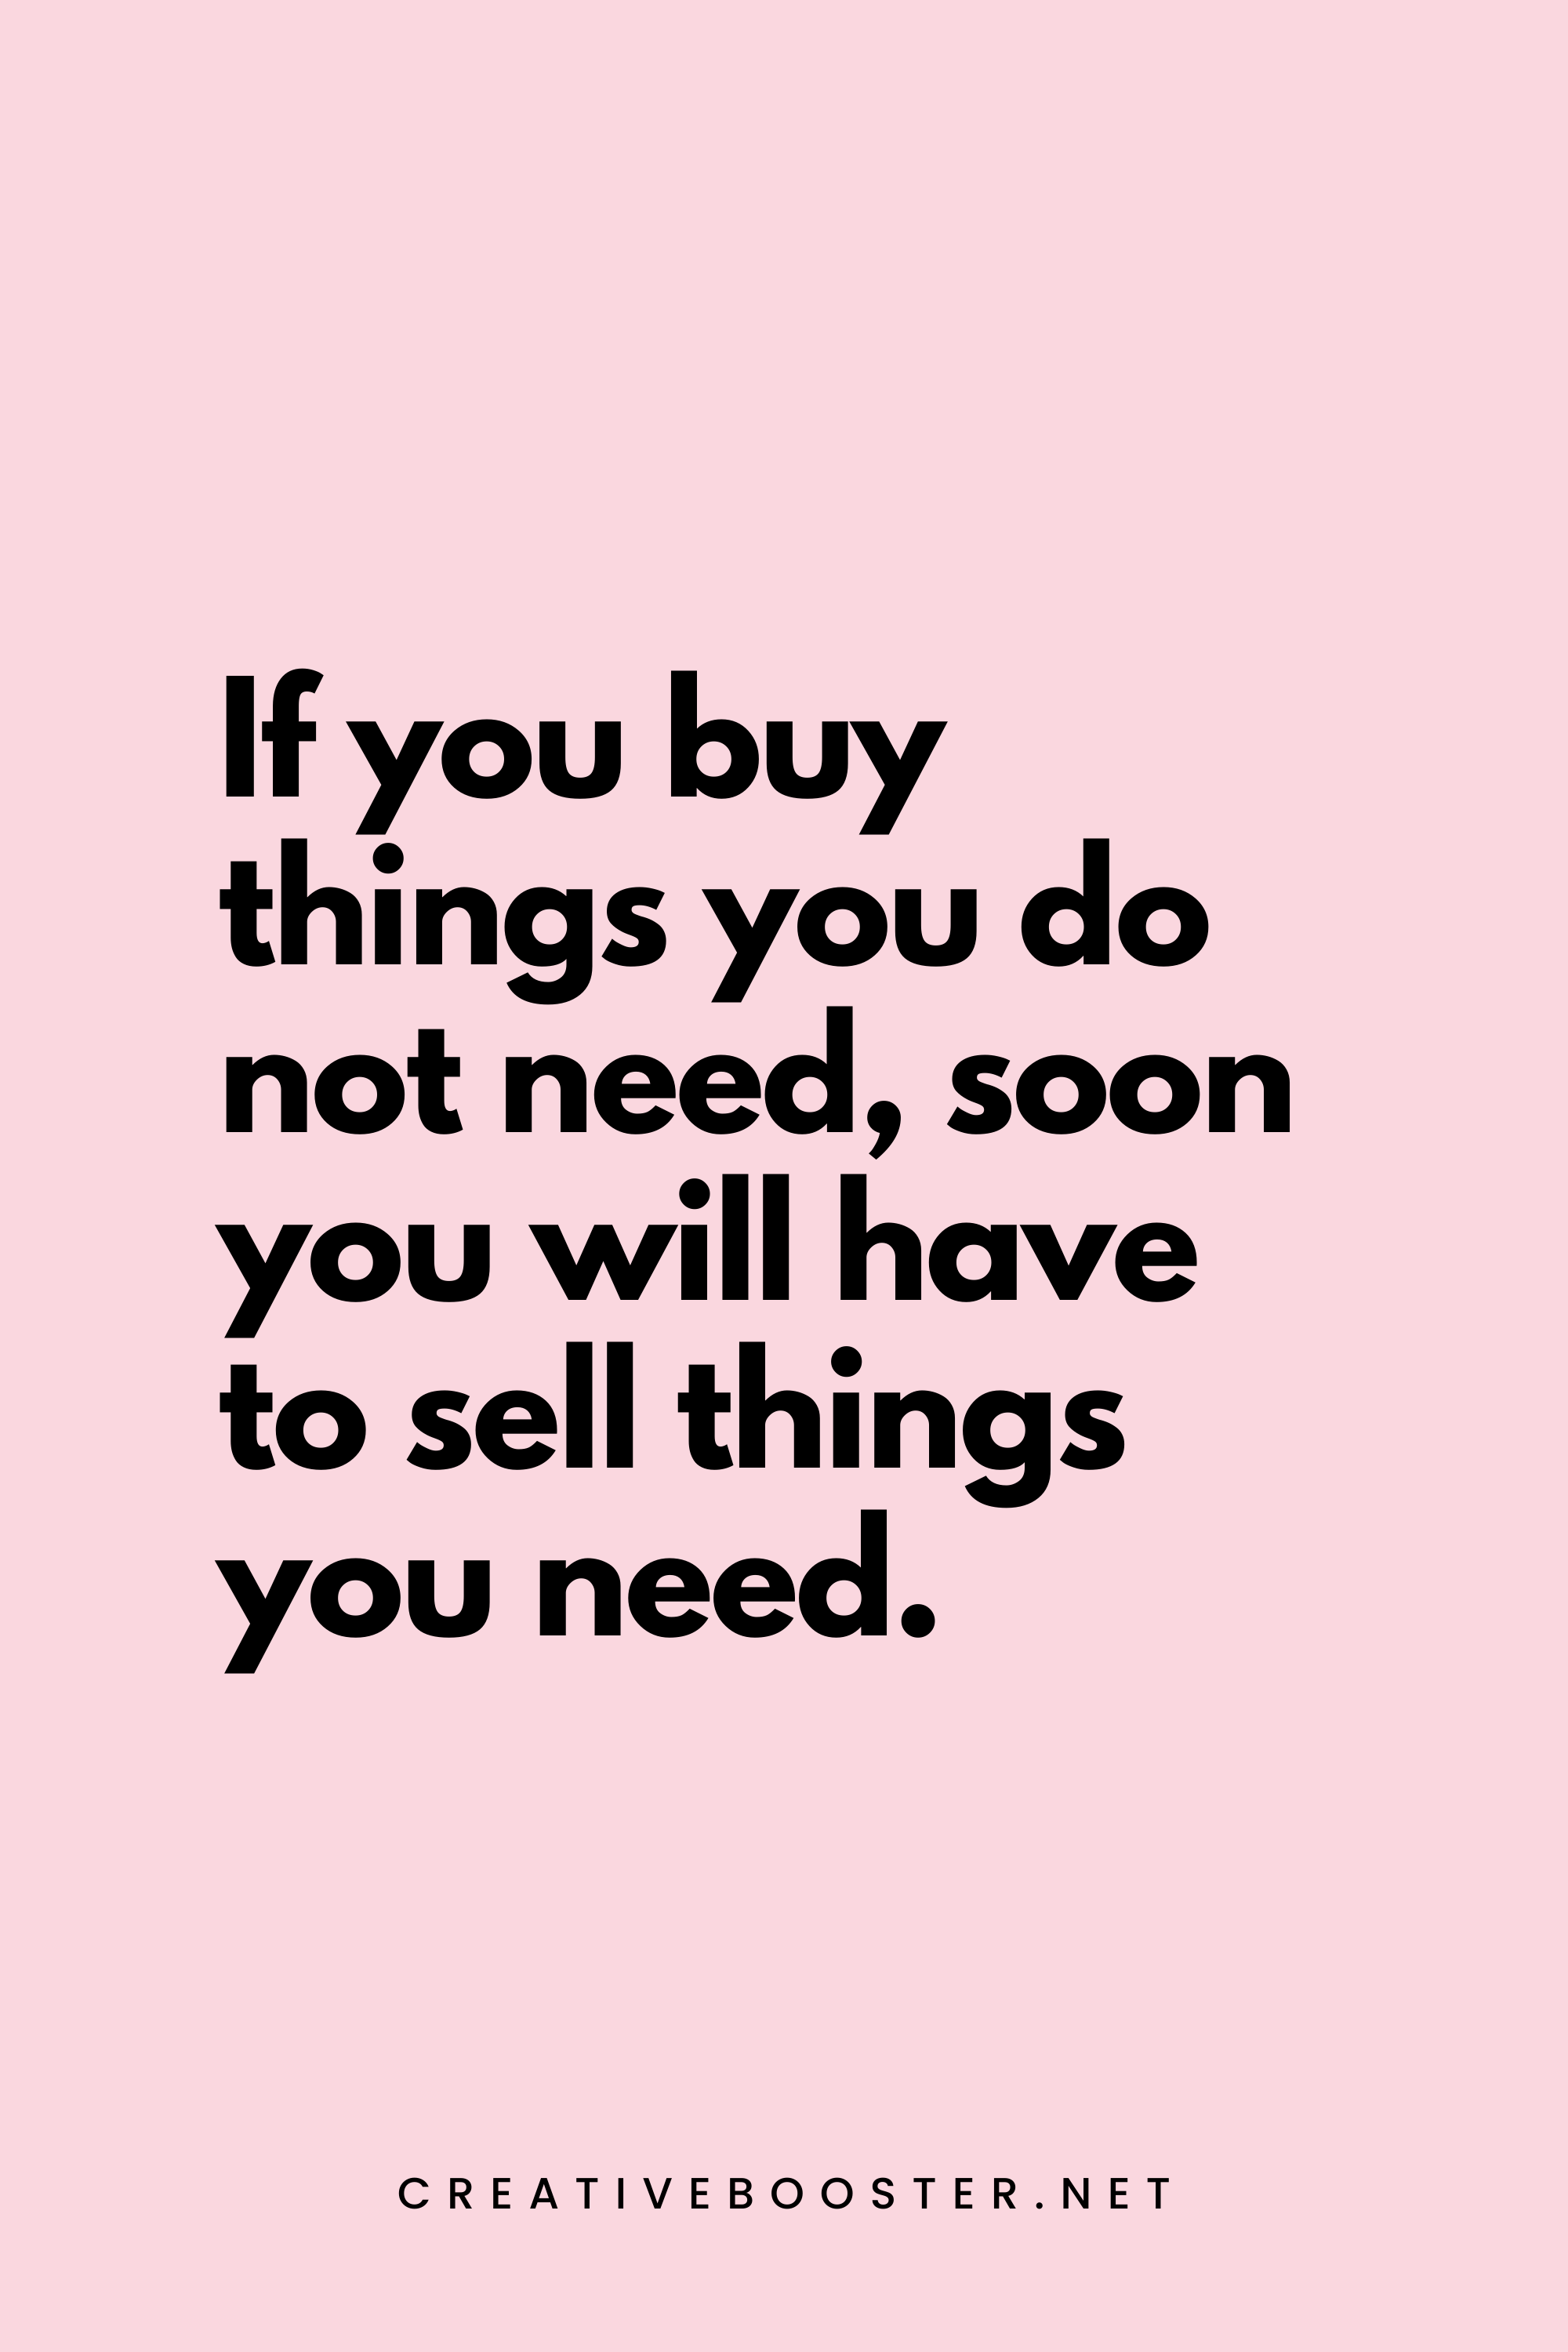 73. If you buy things you do not need, soon you will have to sell things you need. - Warren Buffett - 8. Financial Freedom Quotes by Warren Buffett